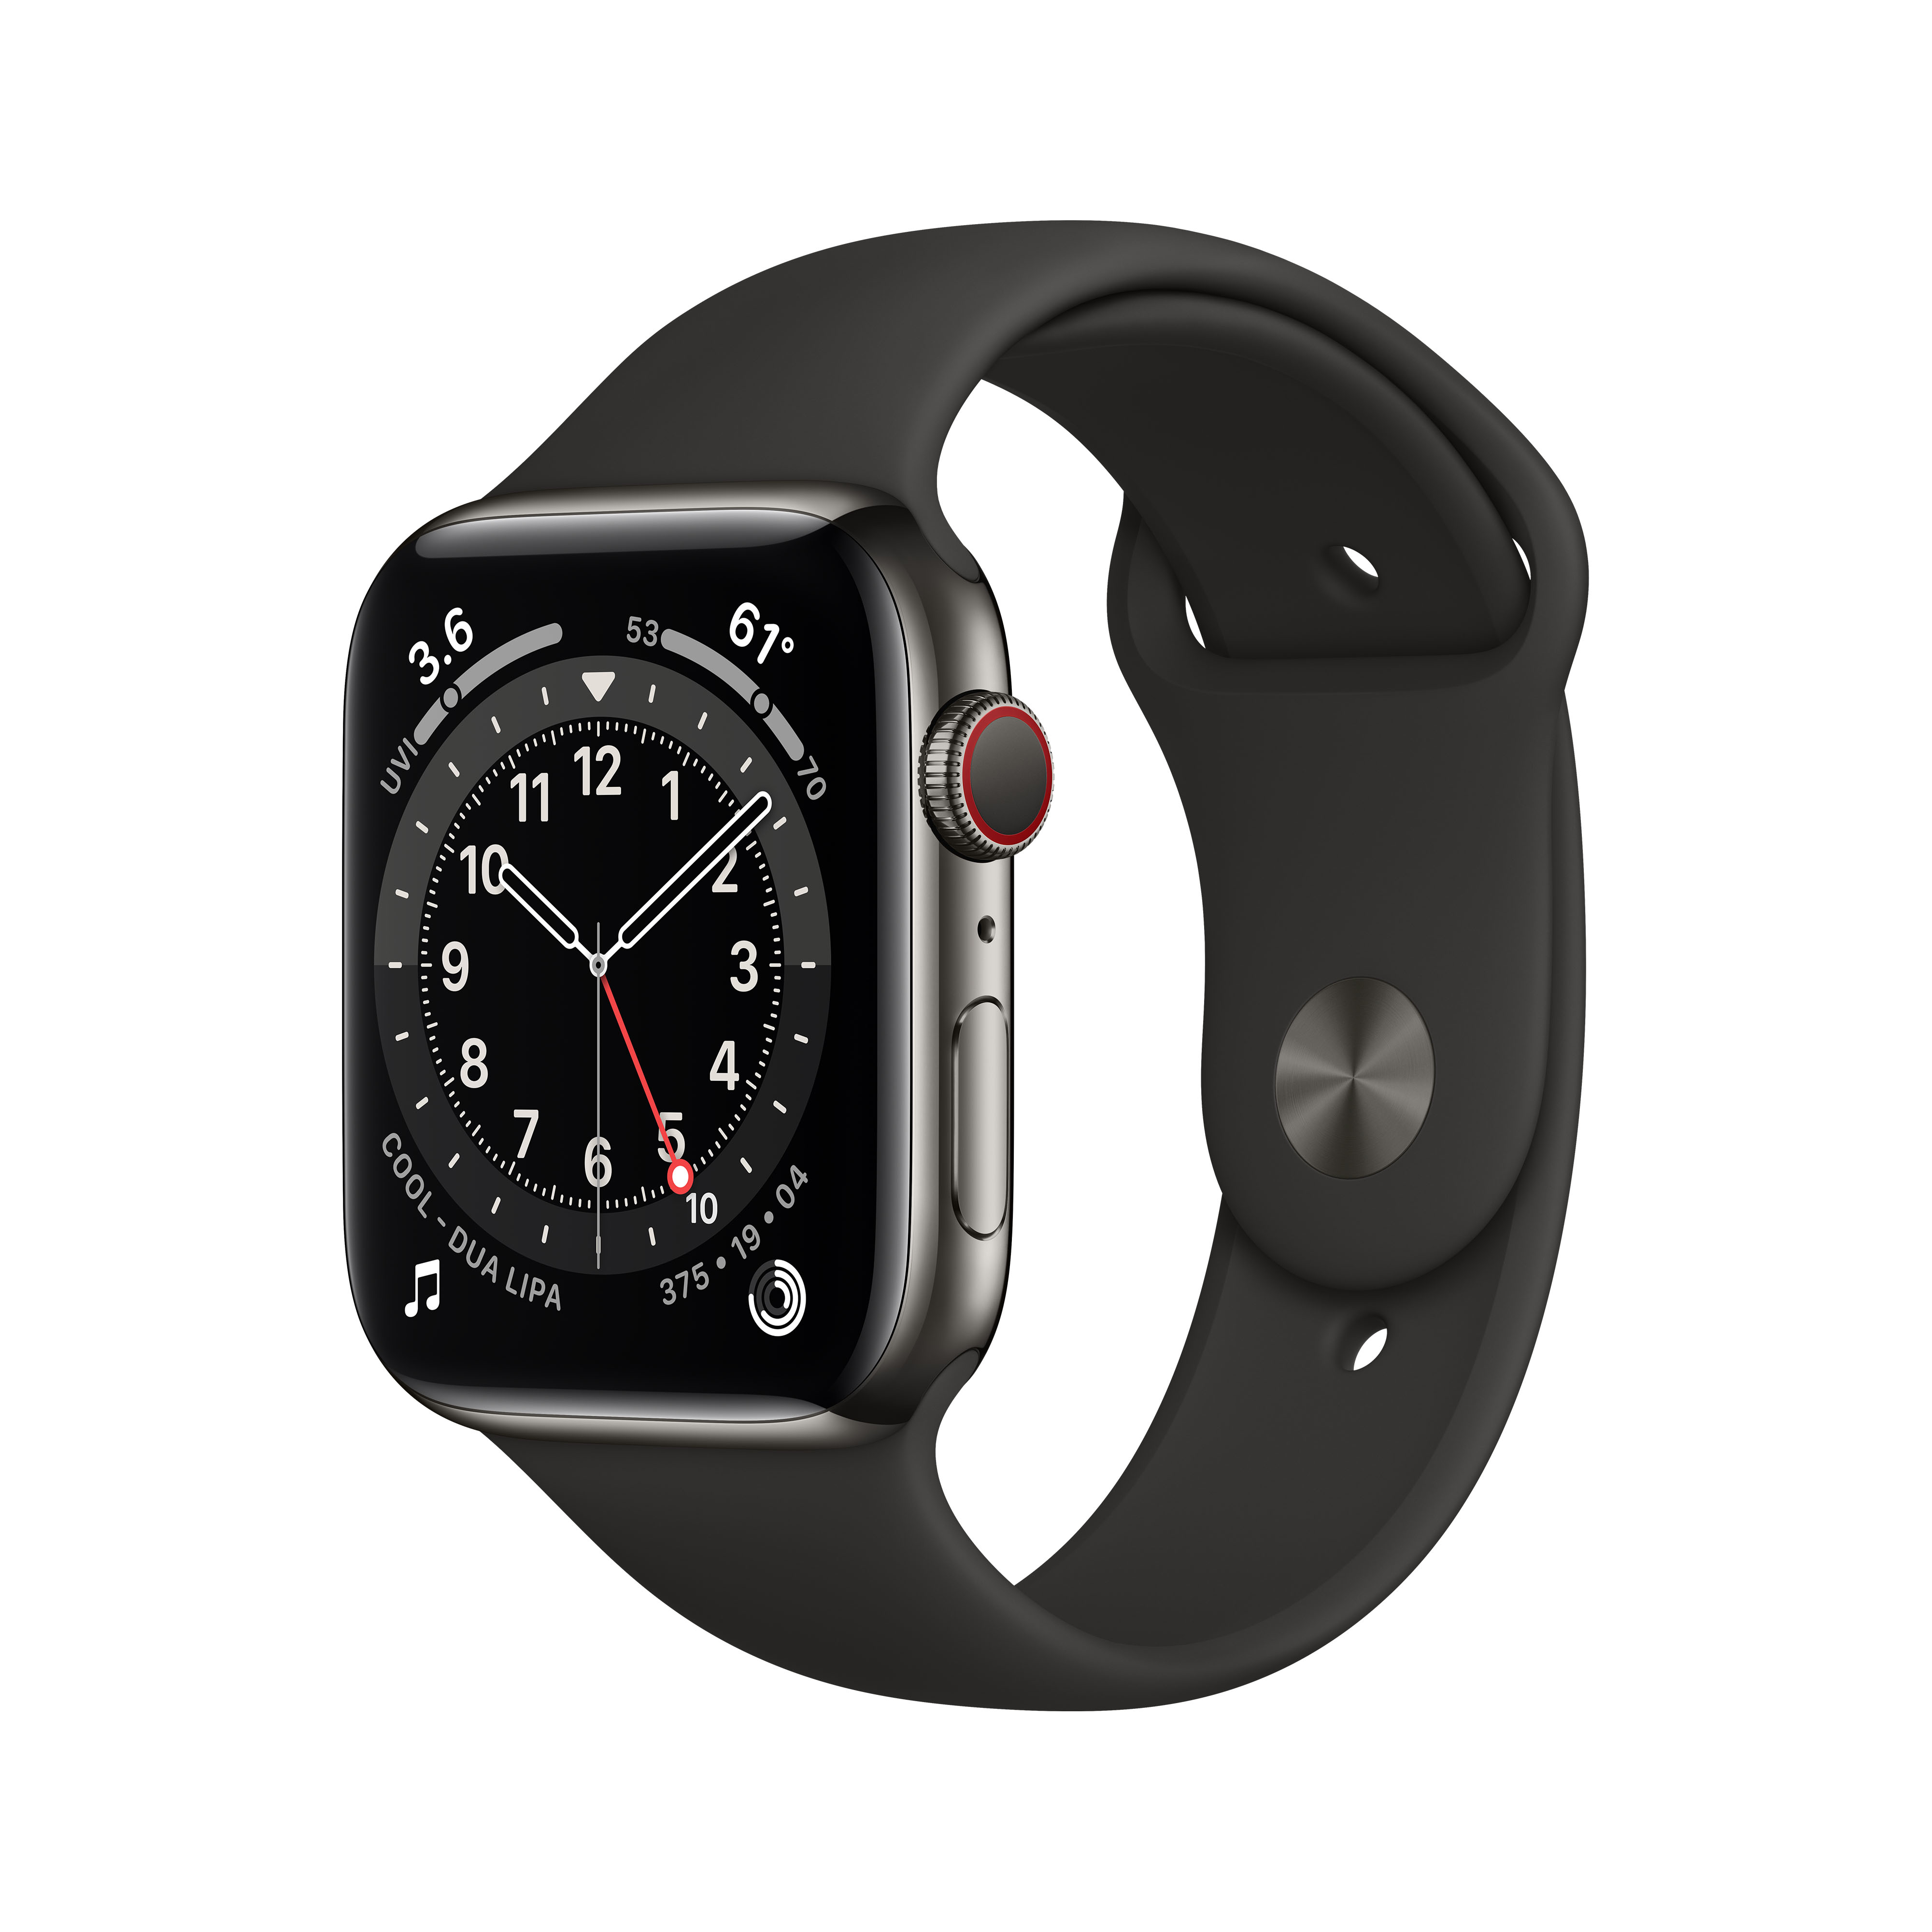 APPLE Apple Watch Series 6 44mm LTE Graphite SS Stainless Steel | Black Sport Band